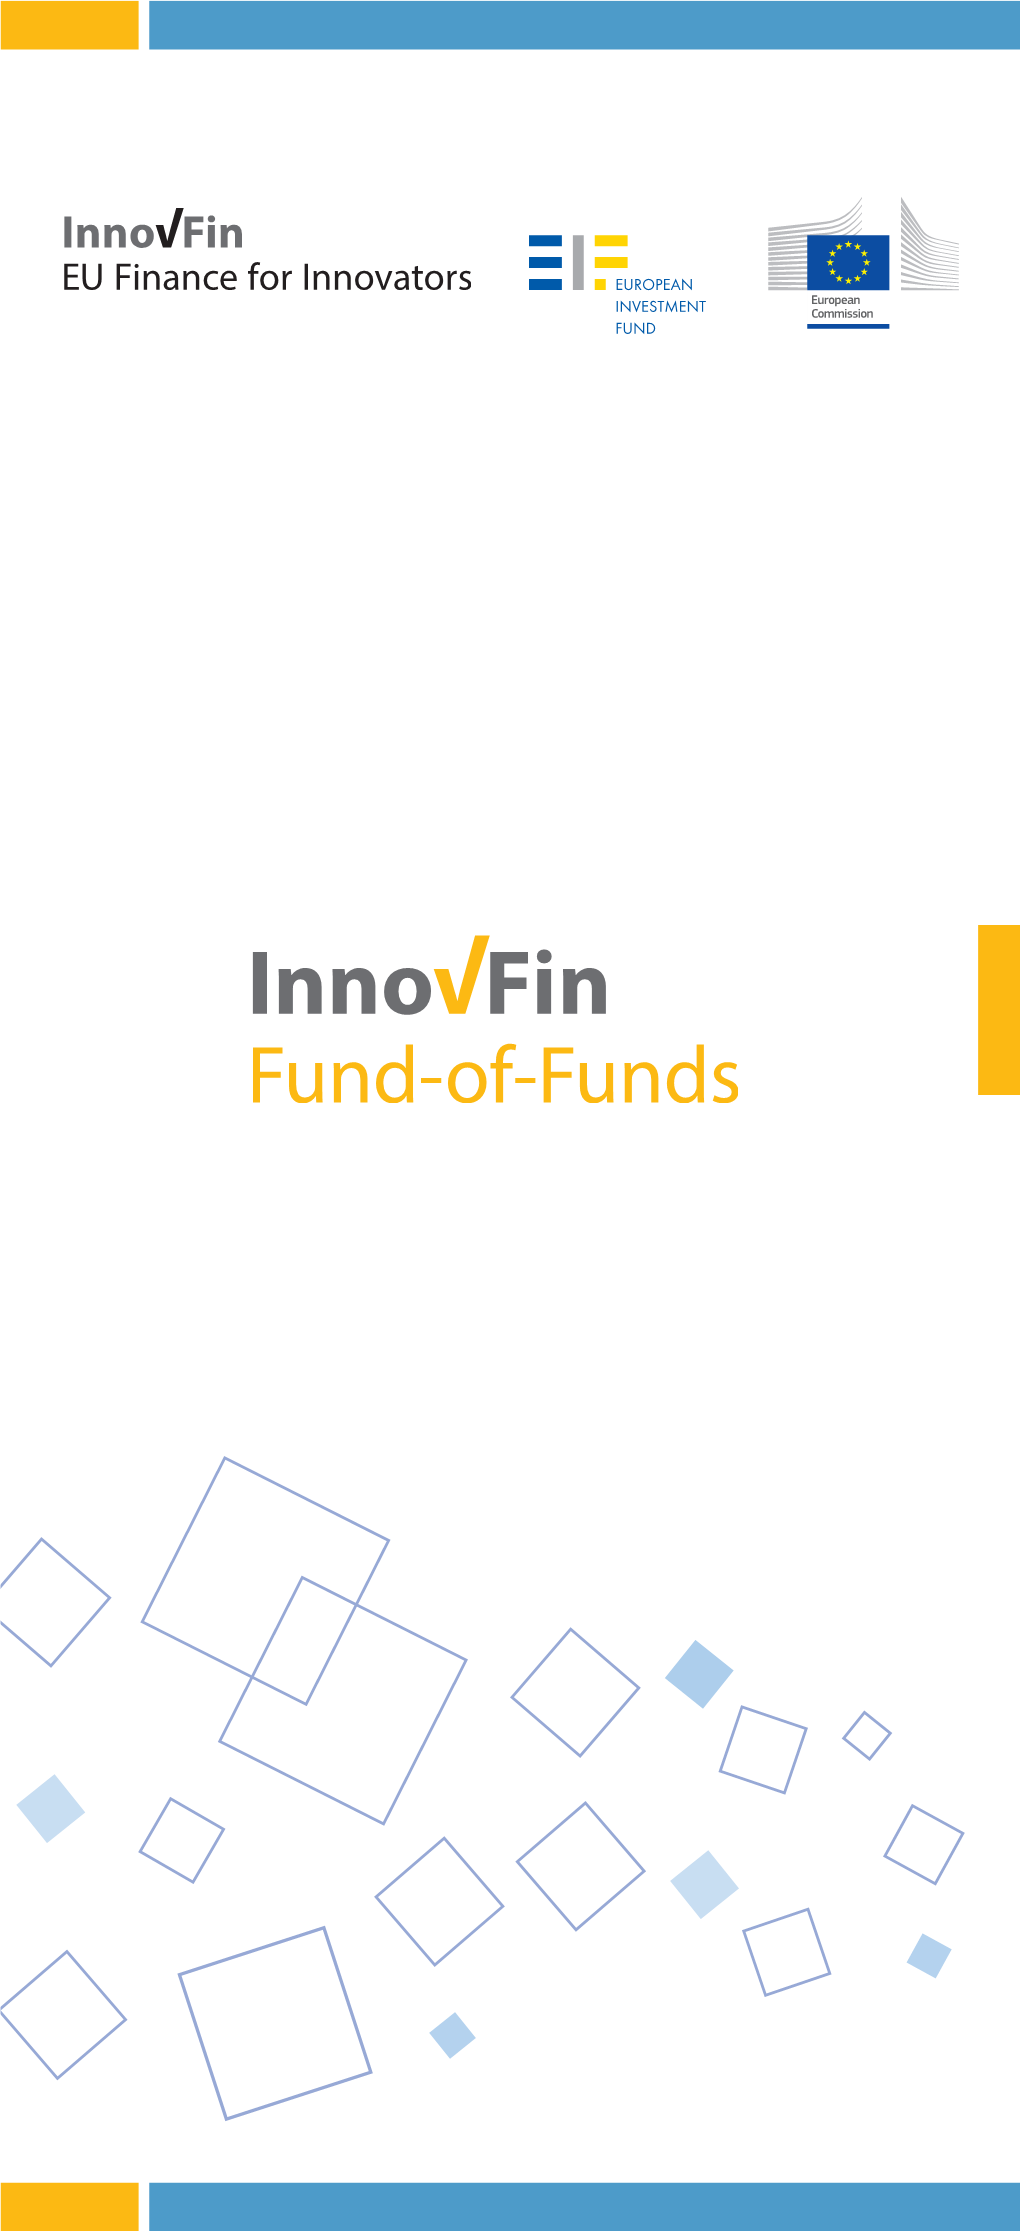 Innovfin Fund-Of-Funds Is Part of Innovfin Equity